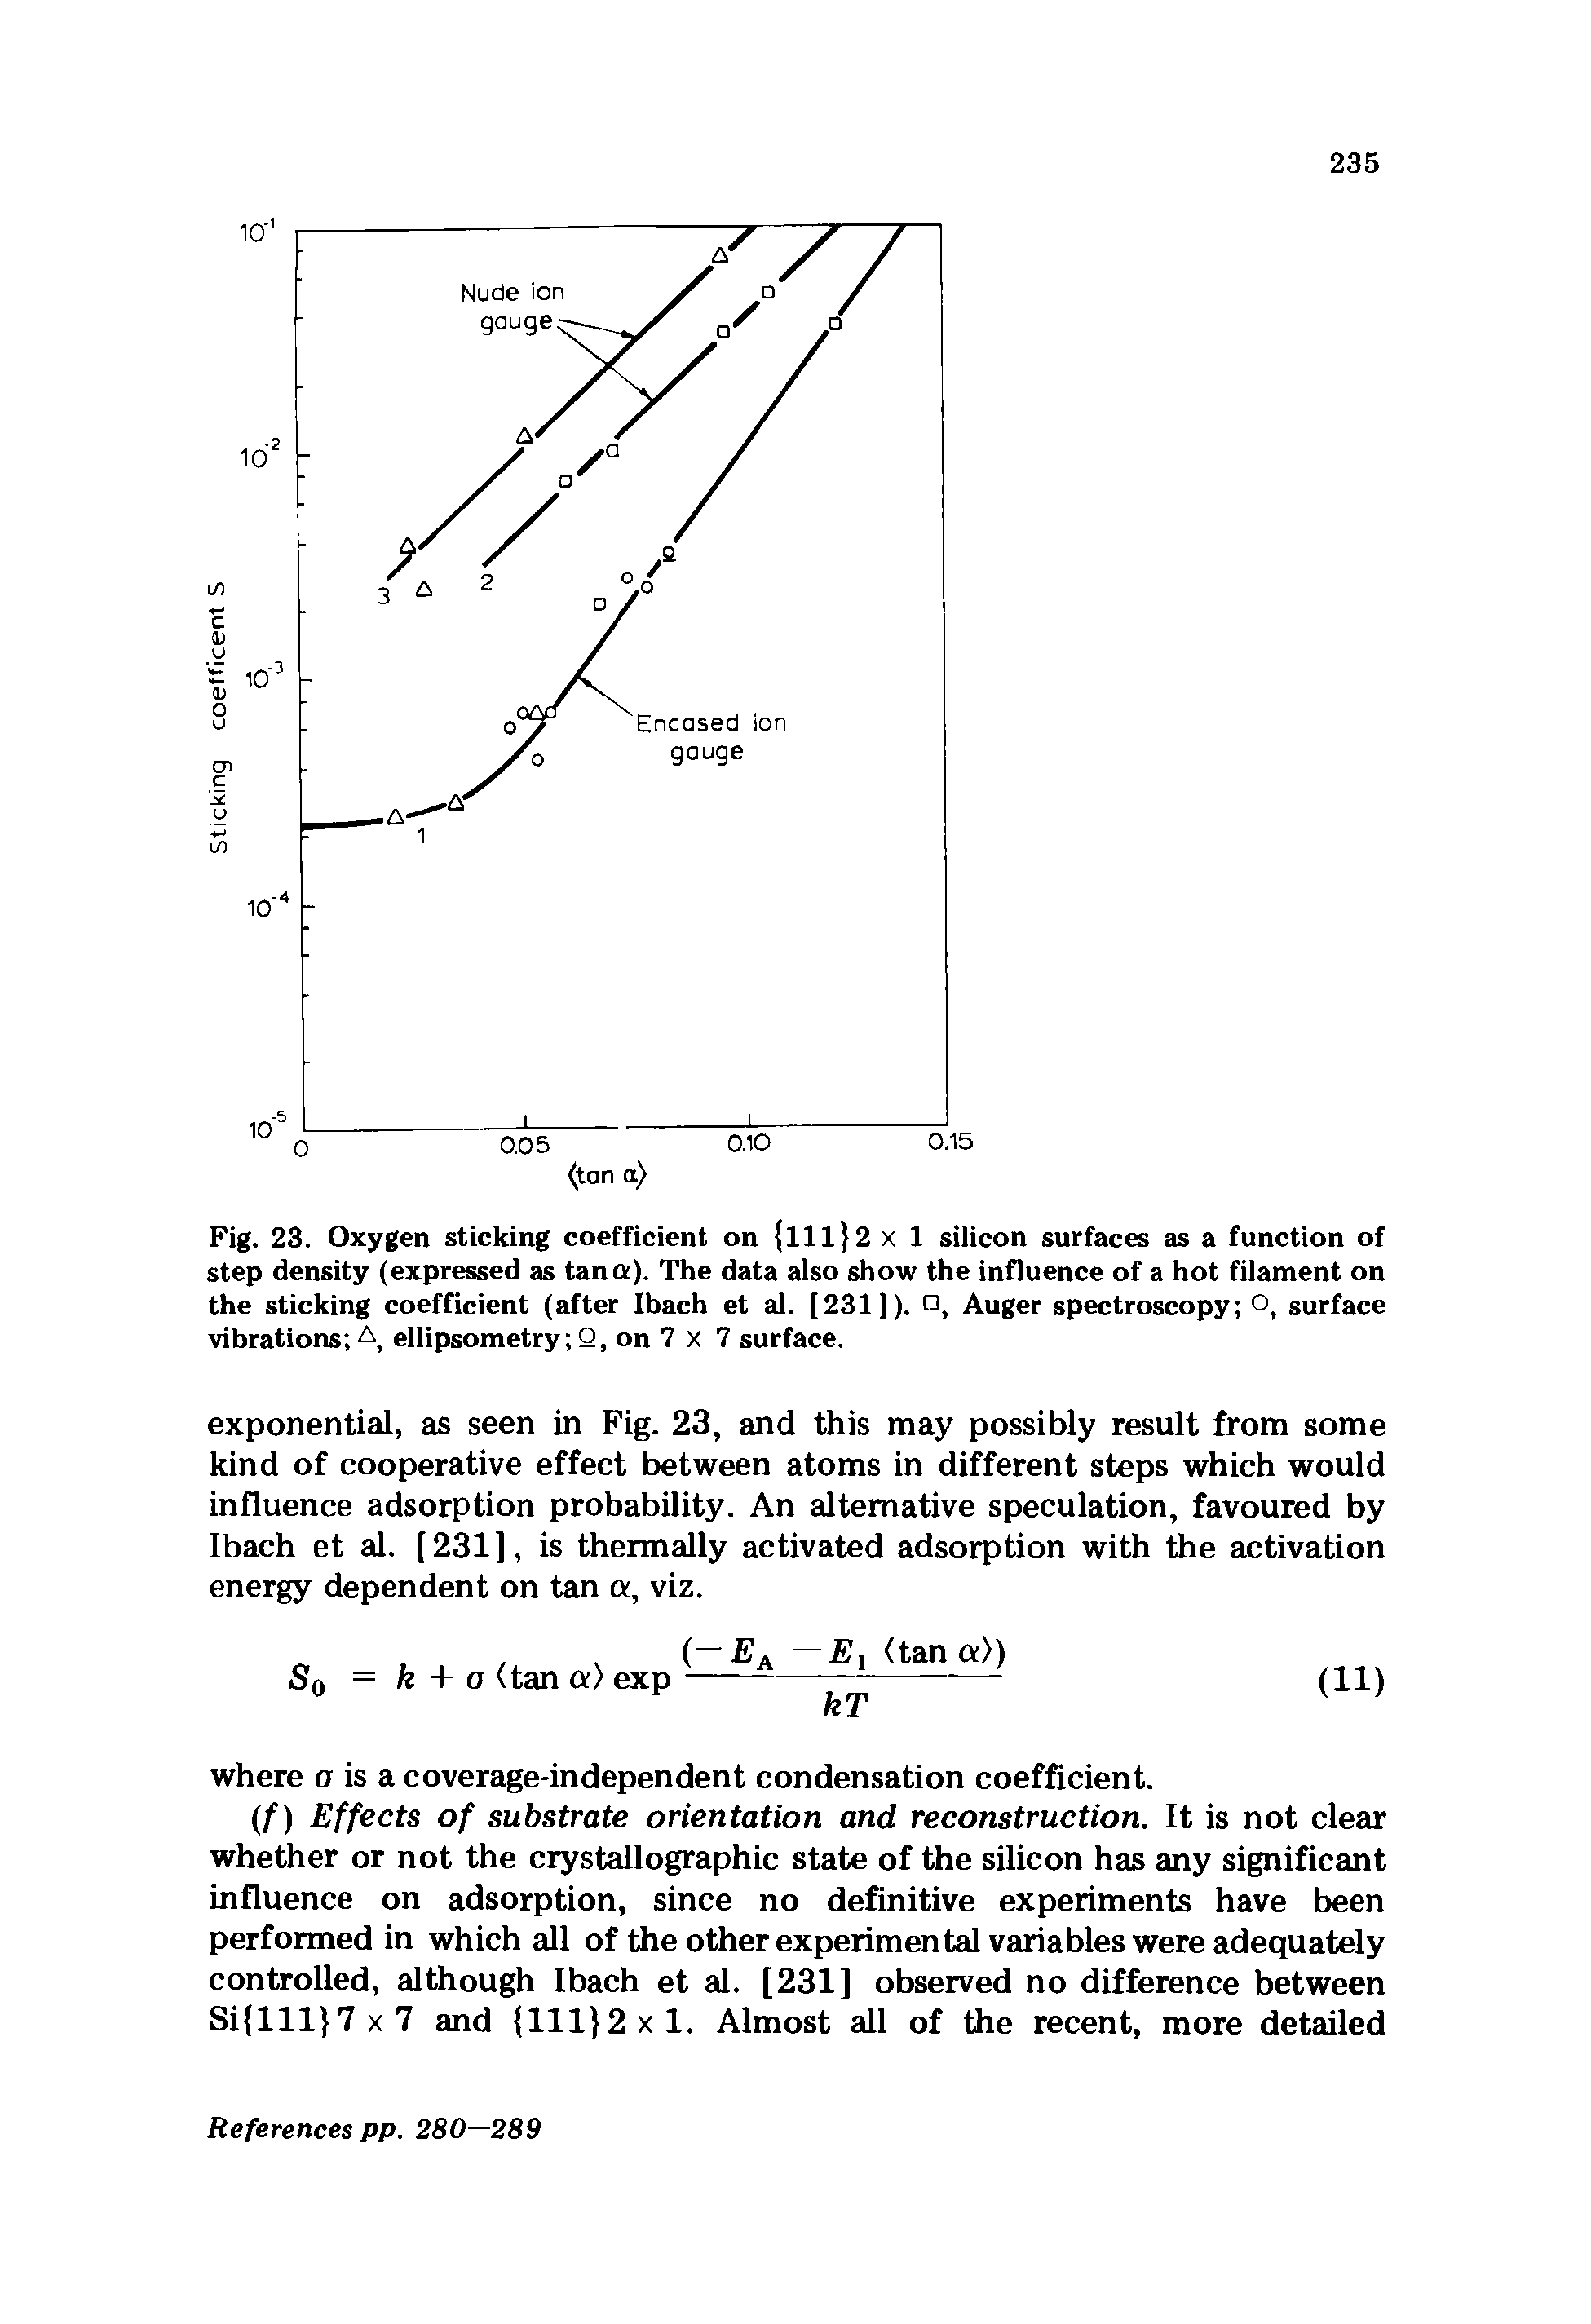 Fig. 23. Oxygen sticking coefficient on [lll 2 x 1 silicon surfaces as a function of step density (expressed as tana). The data also show the influence of a hot filament on the sticking coefficient (after Ibach et al. [231]). , Auger spectroscopy ot surface vibrations A, ellipsometry Q, on 7 X 7 surface.